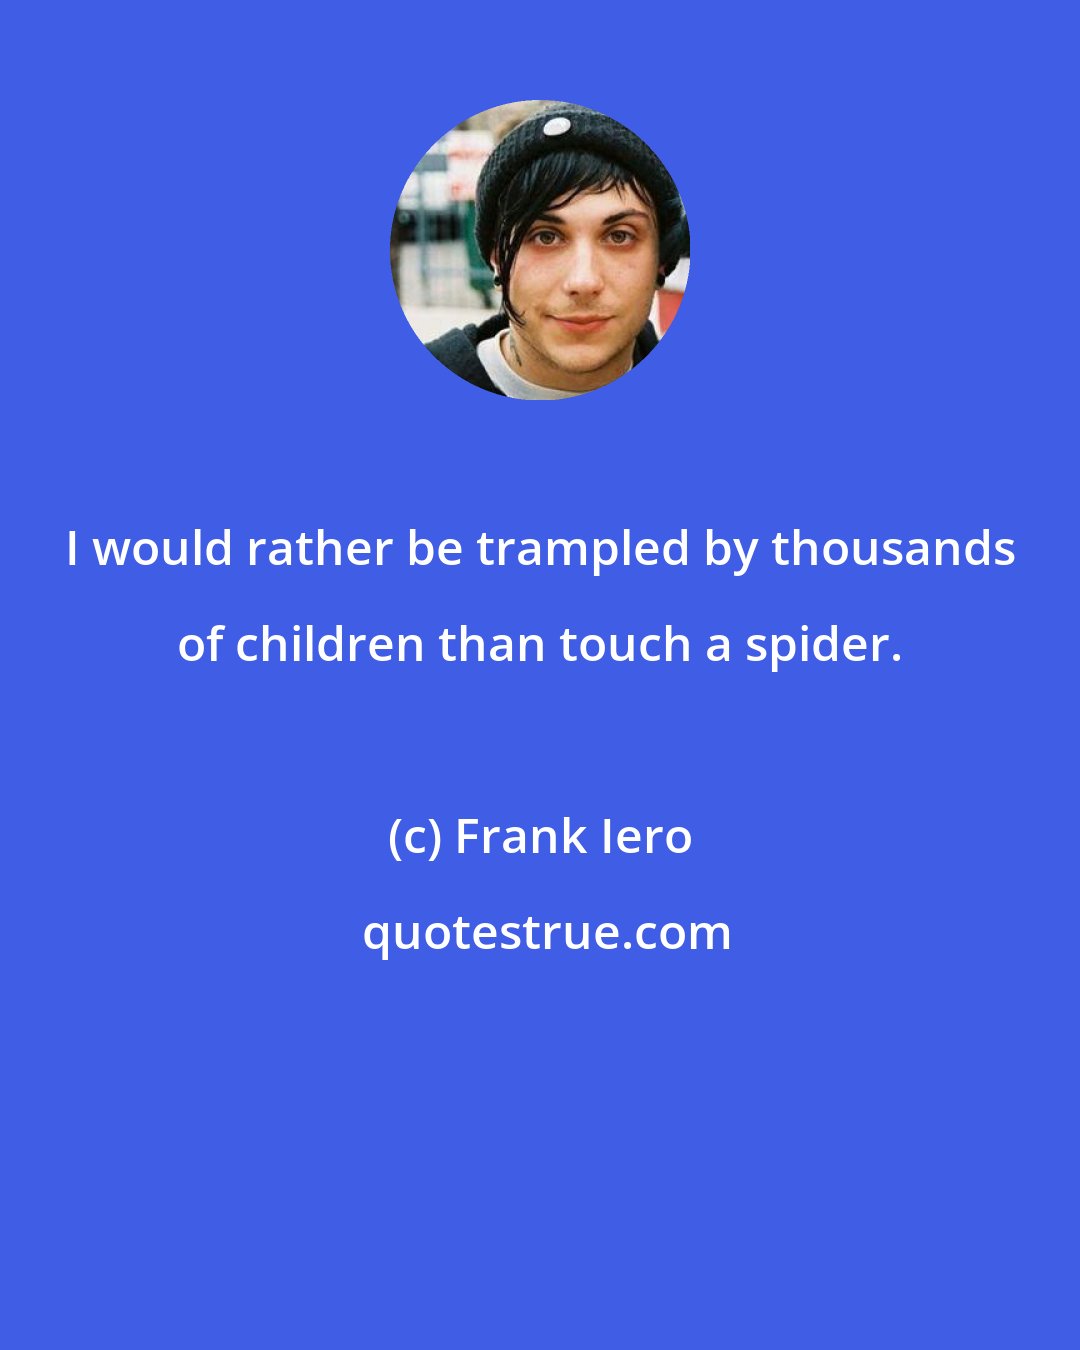 Frank Iero: I would rather be trampled by thousands of children than touch a spider.